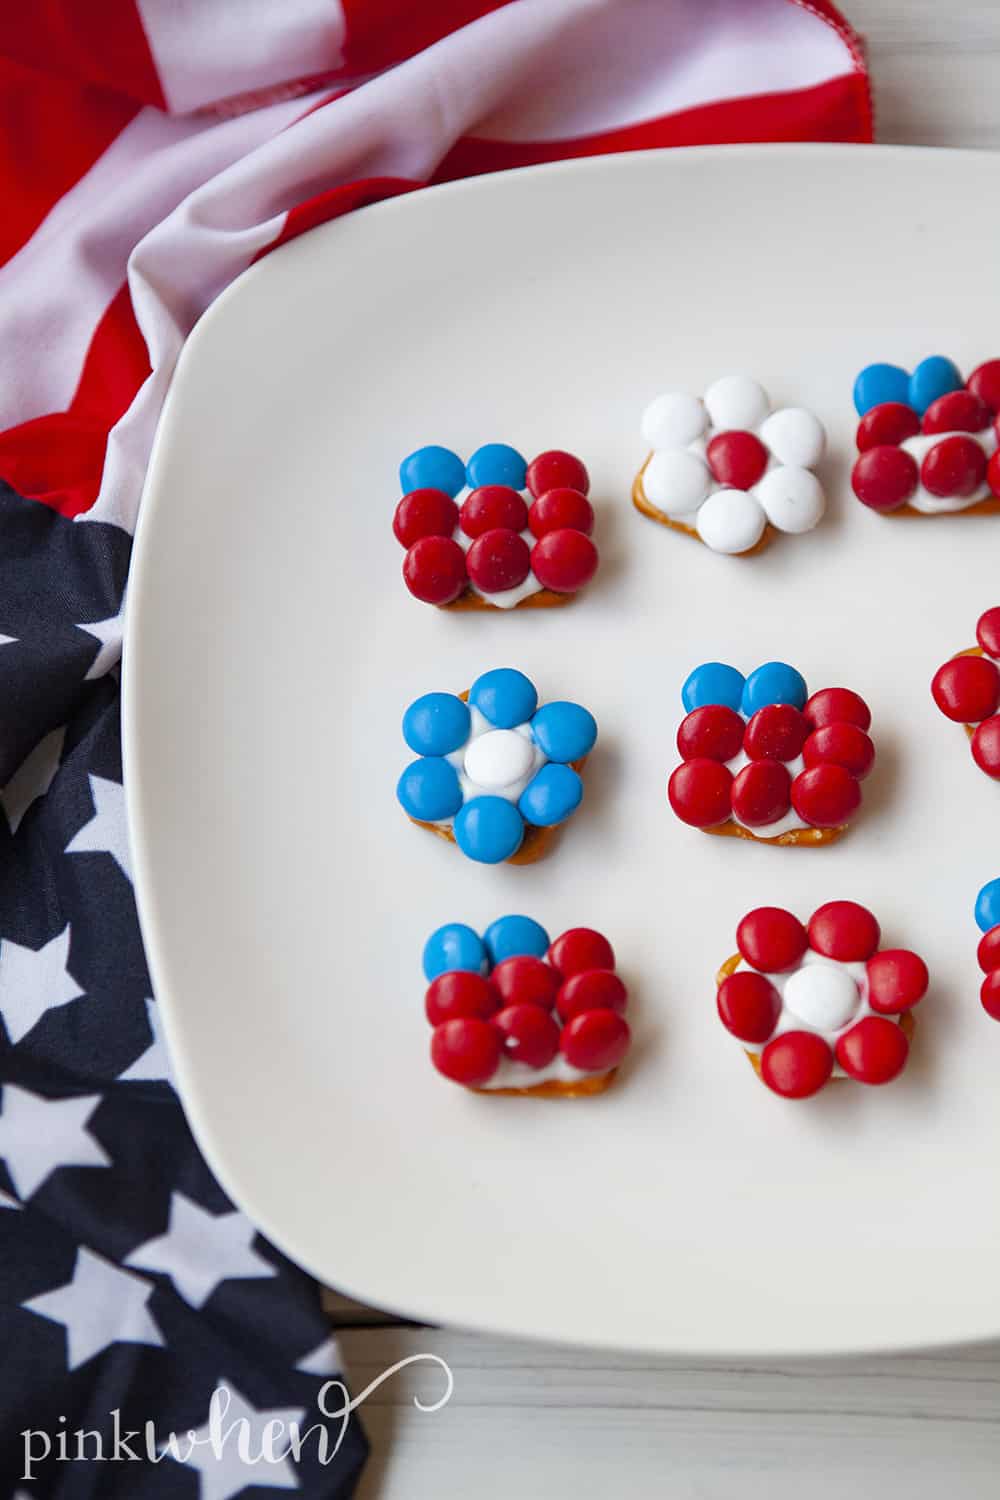 With 4th of July coming up, we have been on the hunt for all kinds of patriotic recipes! You are going to love these patriotic pretzel bites! They're easy to make and very simple, but such a great recipe for kids! These pretzel bites are sure to be a hit.